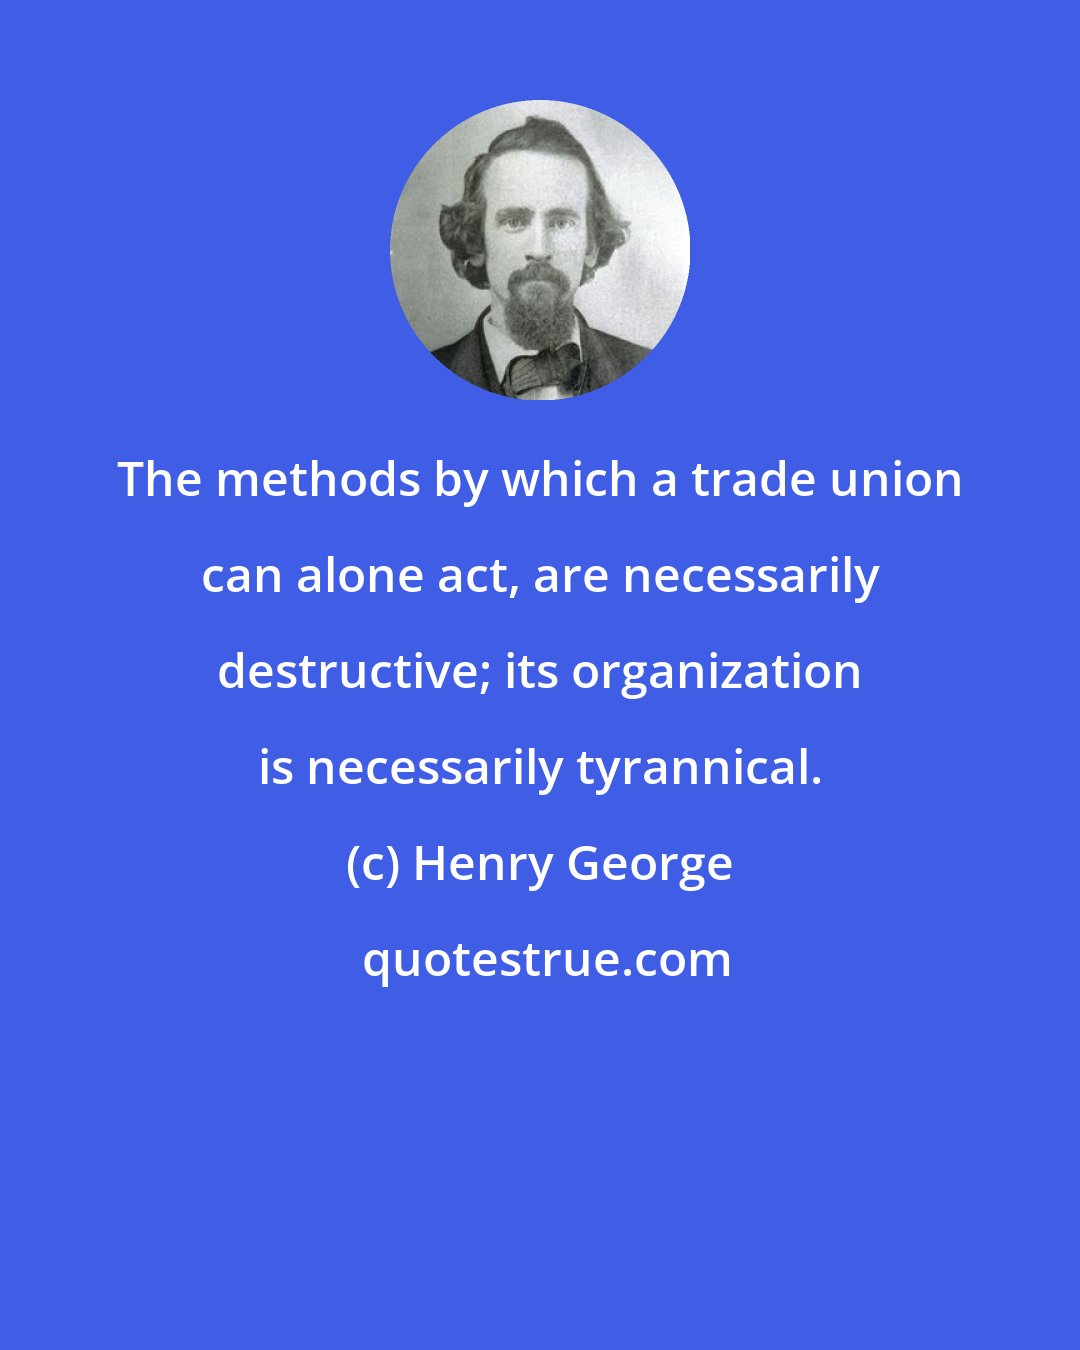 Henry George: The methods by which a trade union can alone act, are necessarily destructive; its organization is necessarily tyrannical.